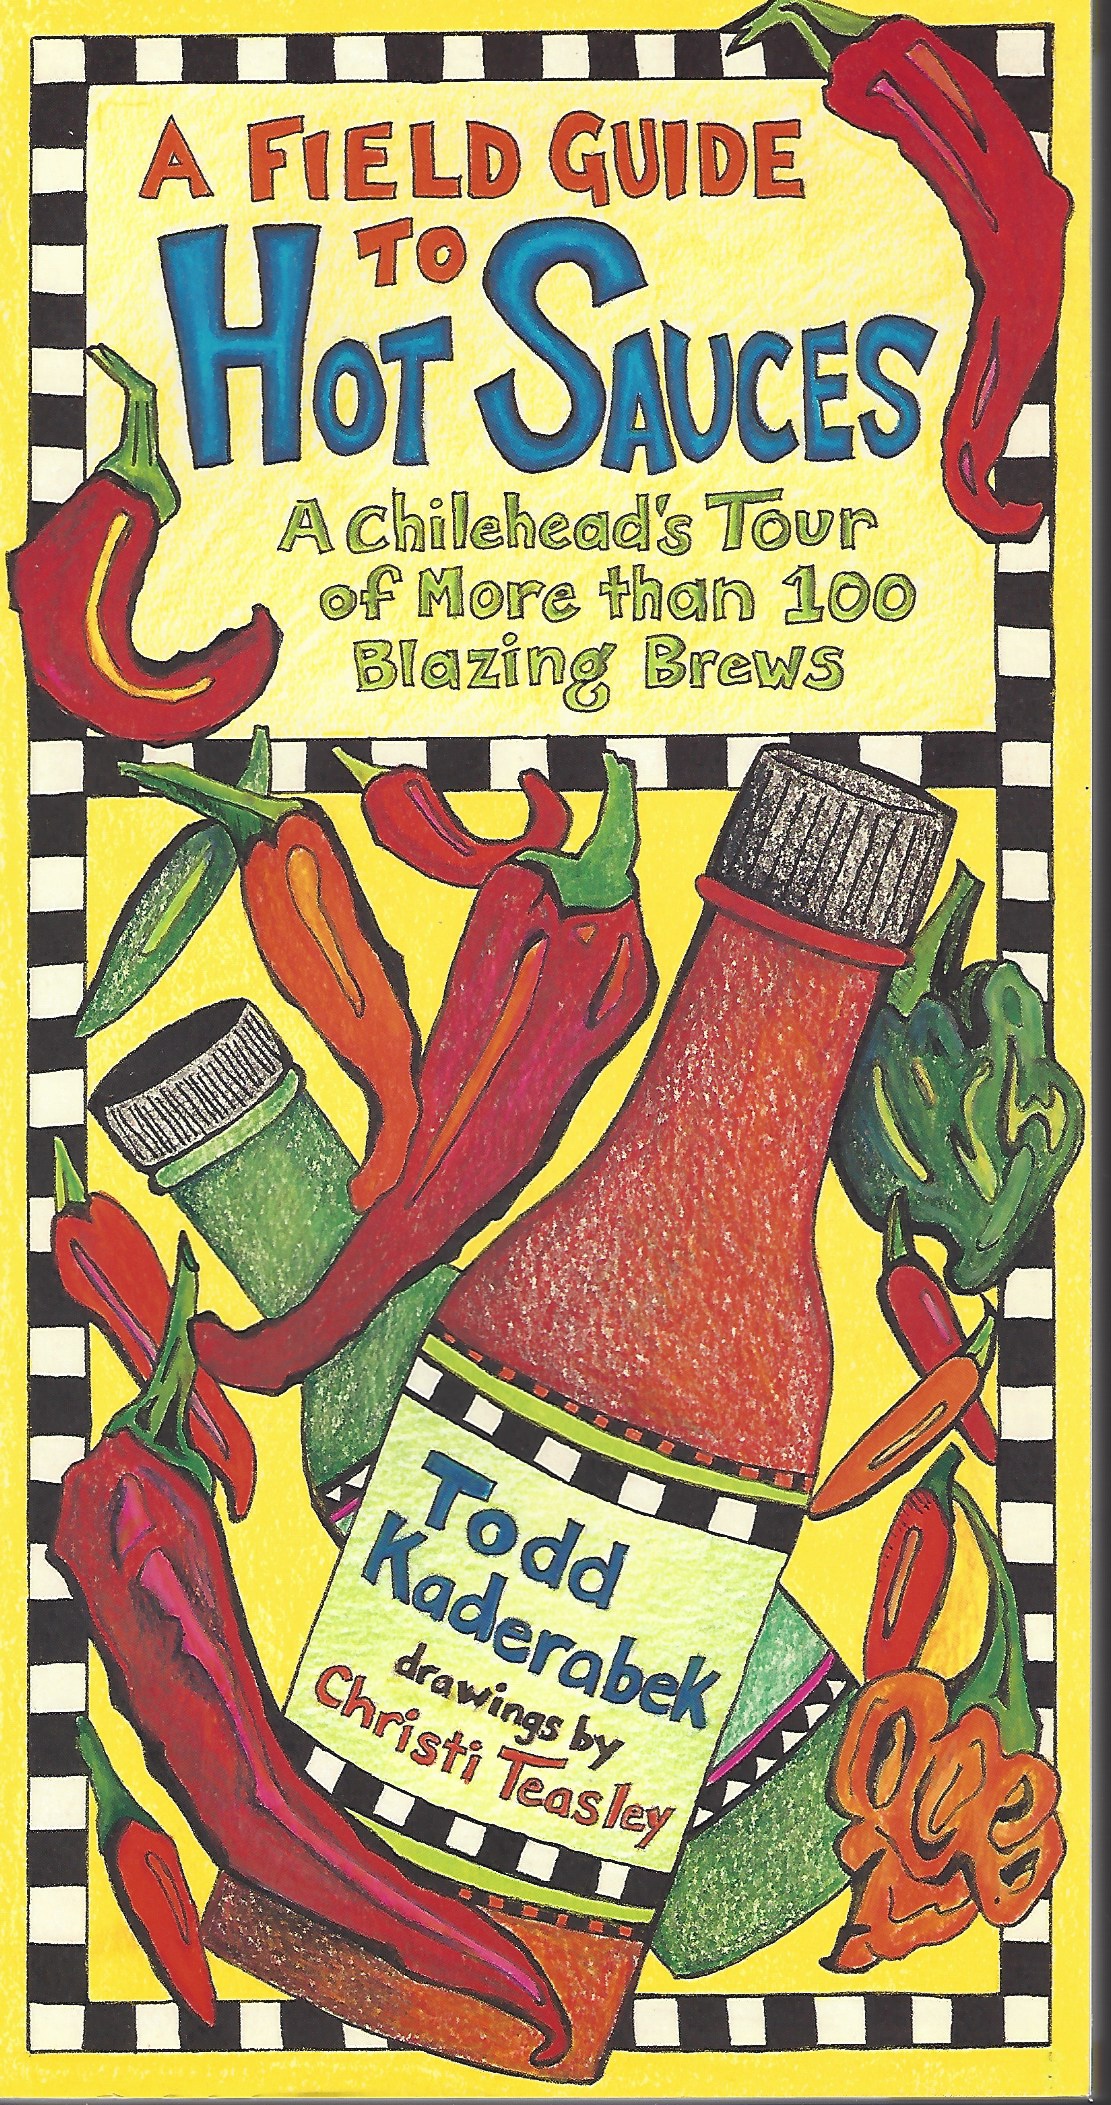 KADERABEK TODD - A Field Guide to Hot Sauces a Chilehead's Tour of More Than 100 Blazing Brews